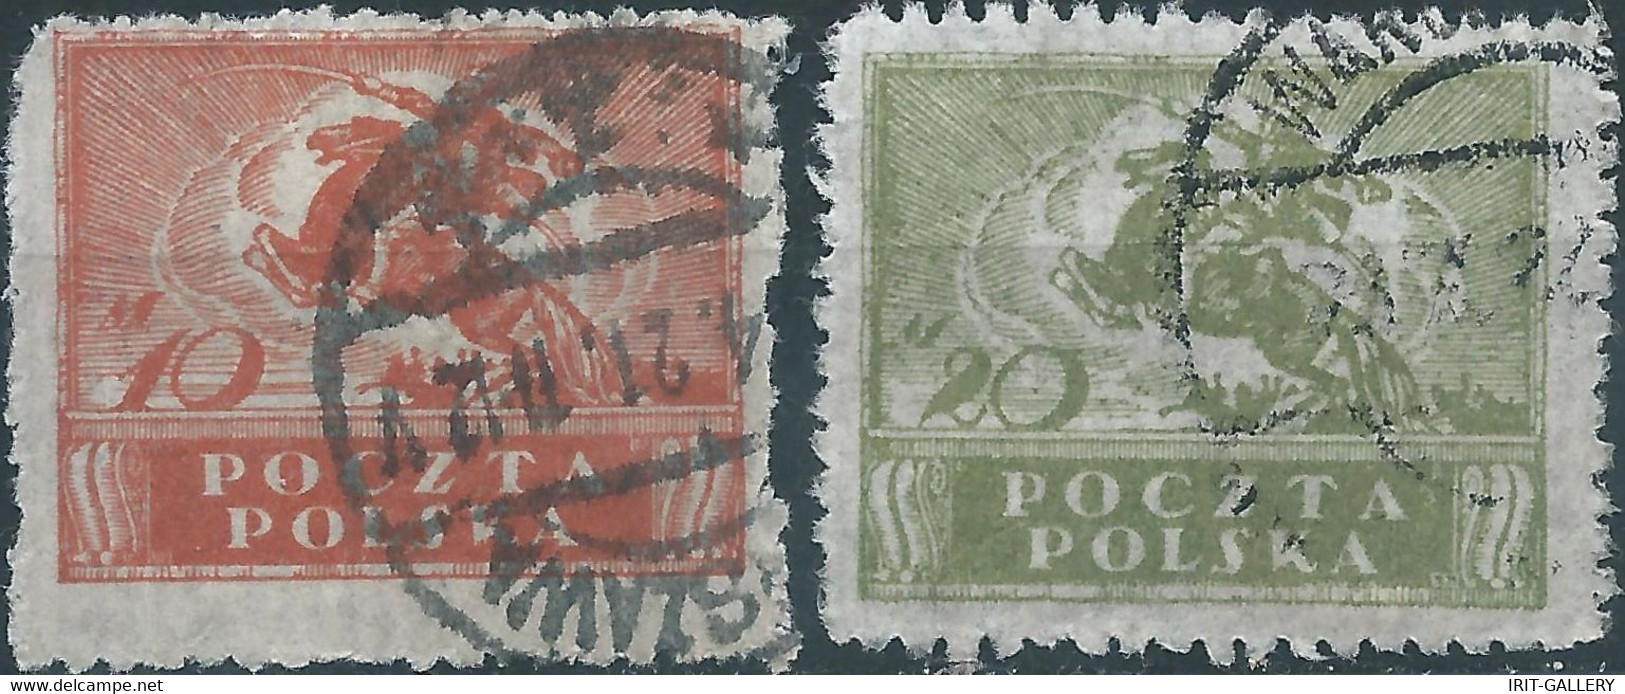 POLONIA-POLAND-POLSKA,1919 South And North Poland Issues -10M & 20M ,Obliterated - Usados